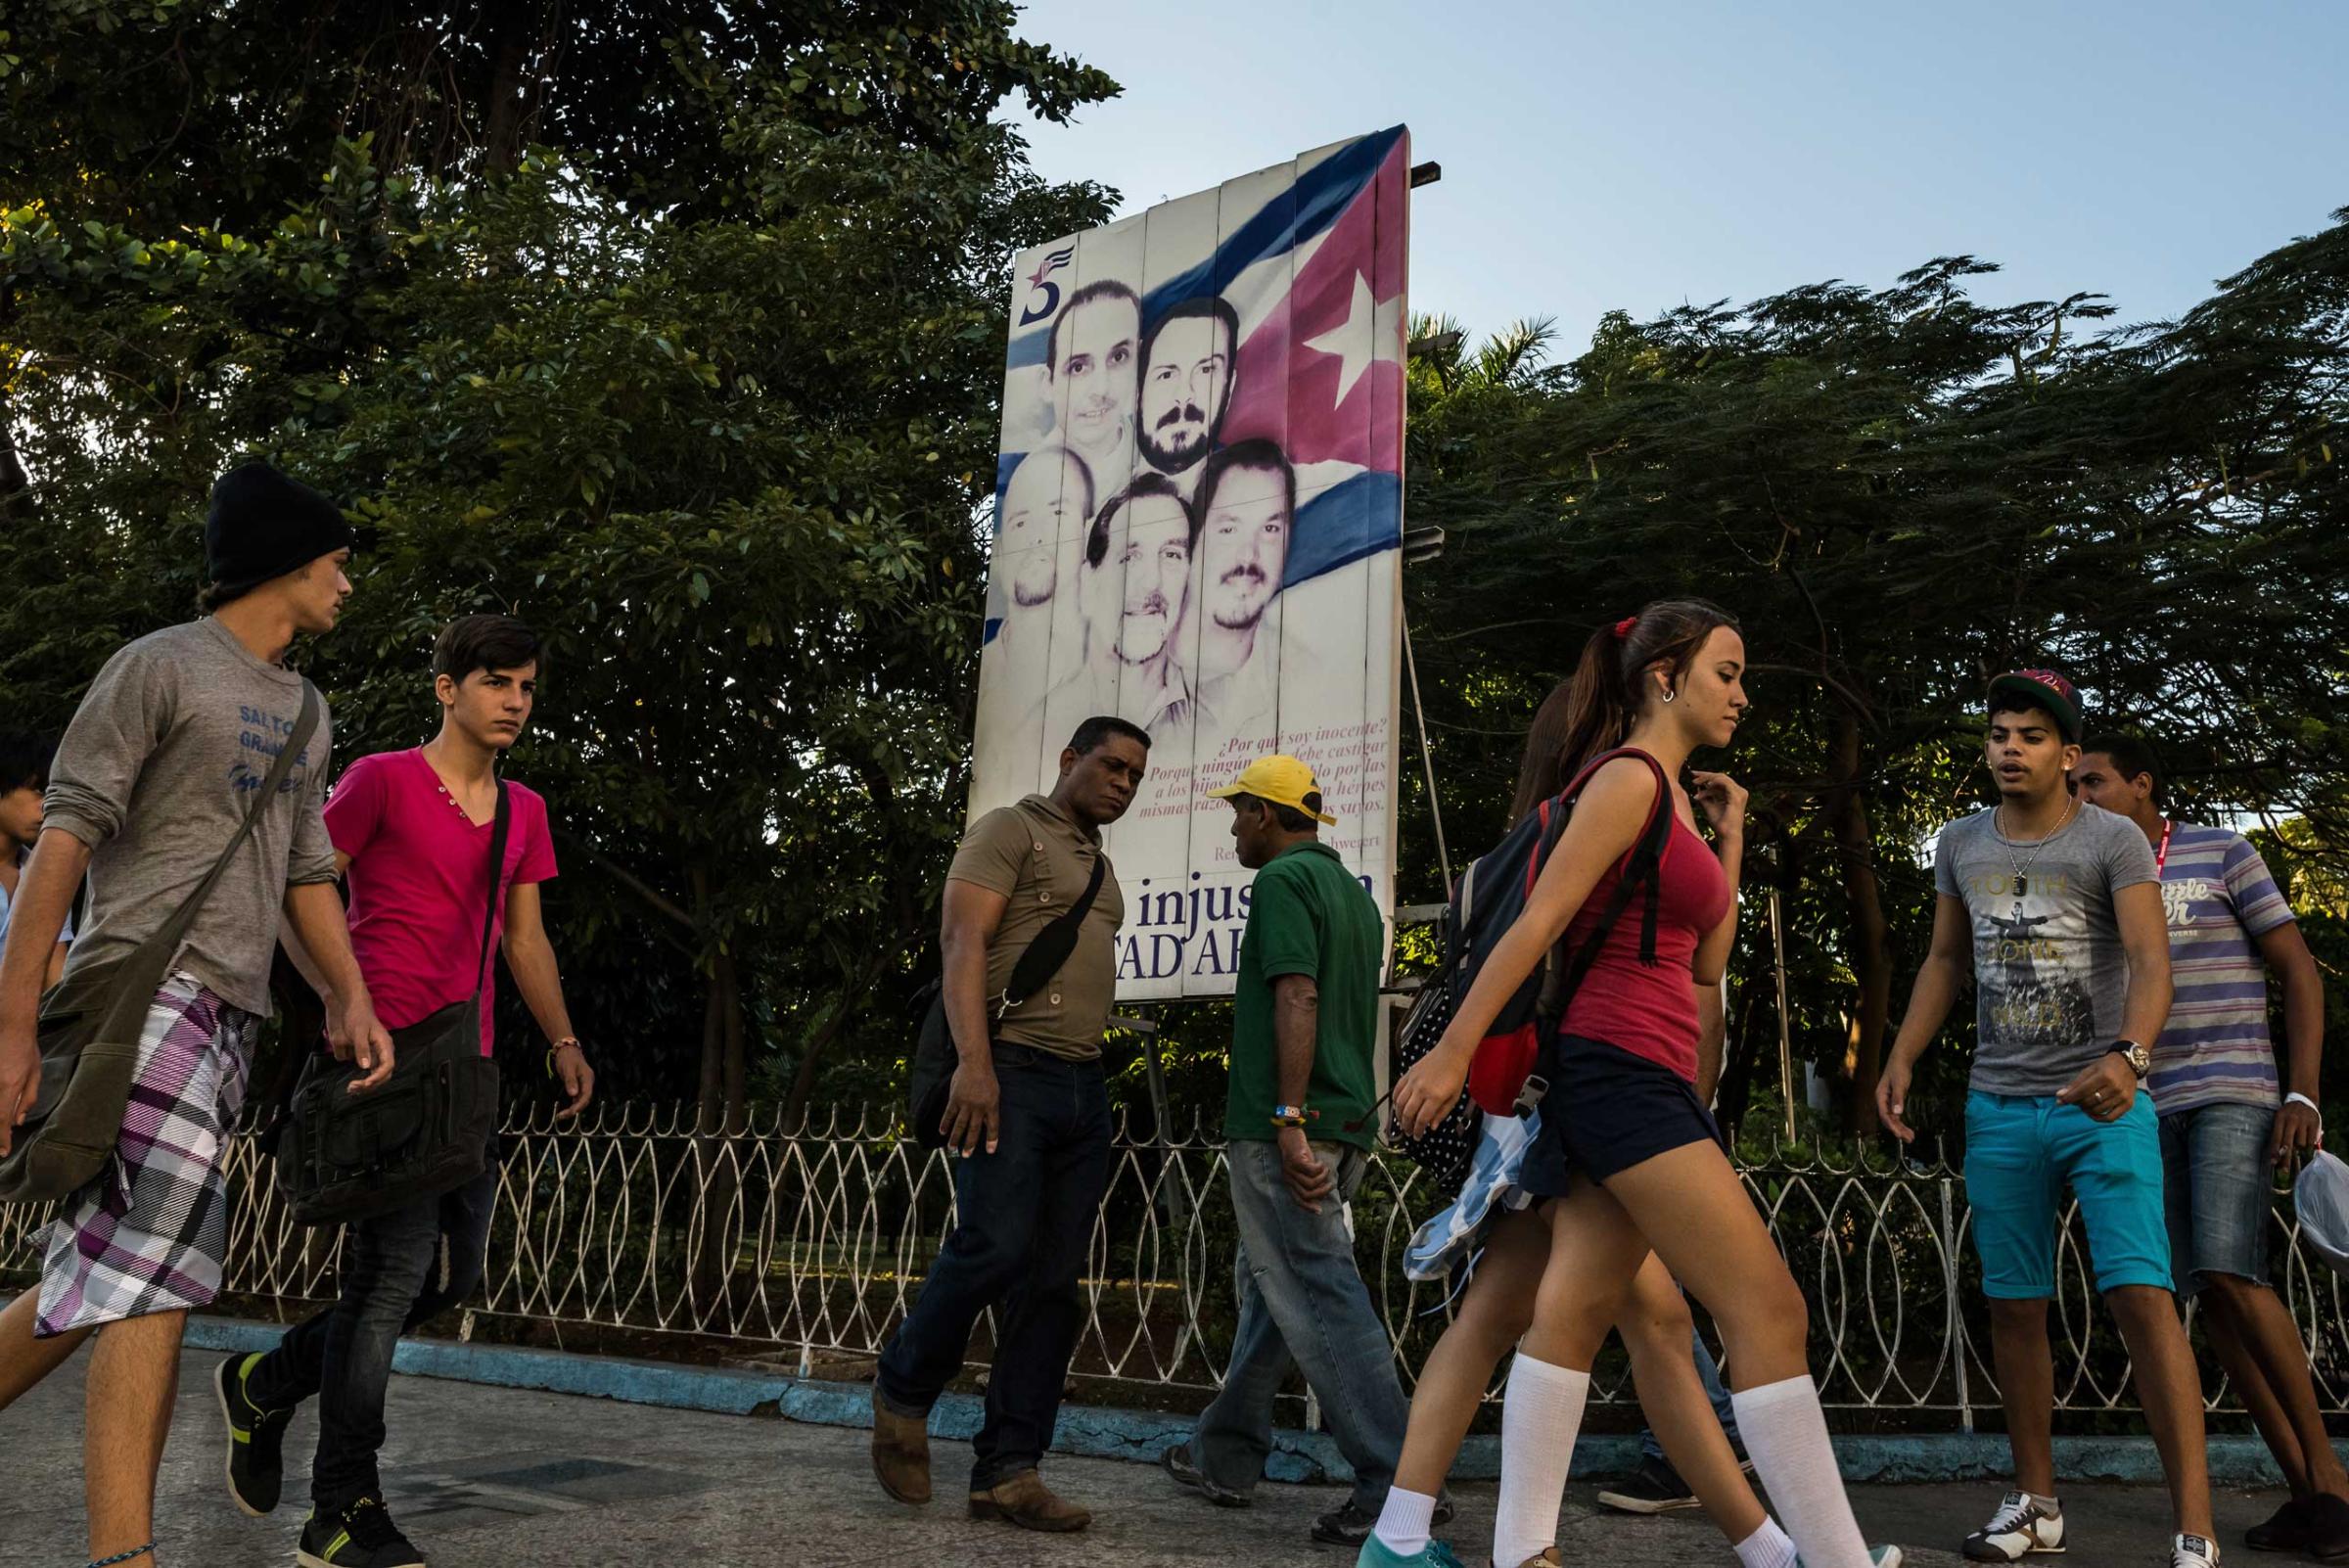 People pass a poster calling for the release of the Cuban Five spies, the last of who were released on Wednesday, in Havana.